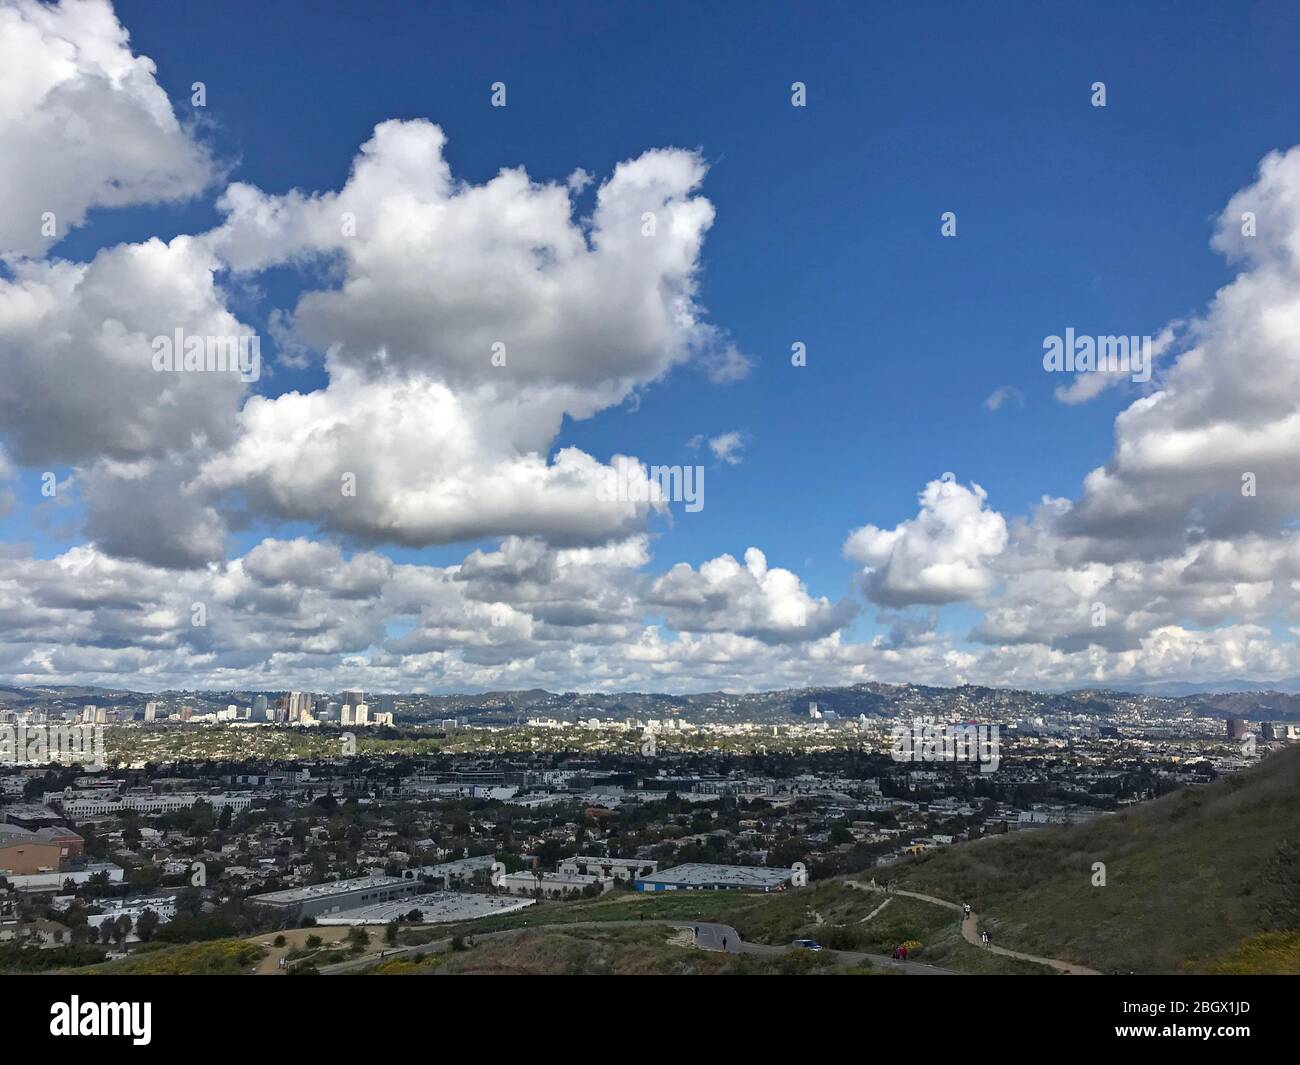 View across the Los Angeles basin of Culver City, Century City and Westwood from Baldwin Hills Scenic Overlook park on a clear day. Stock Photo